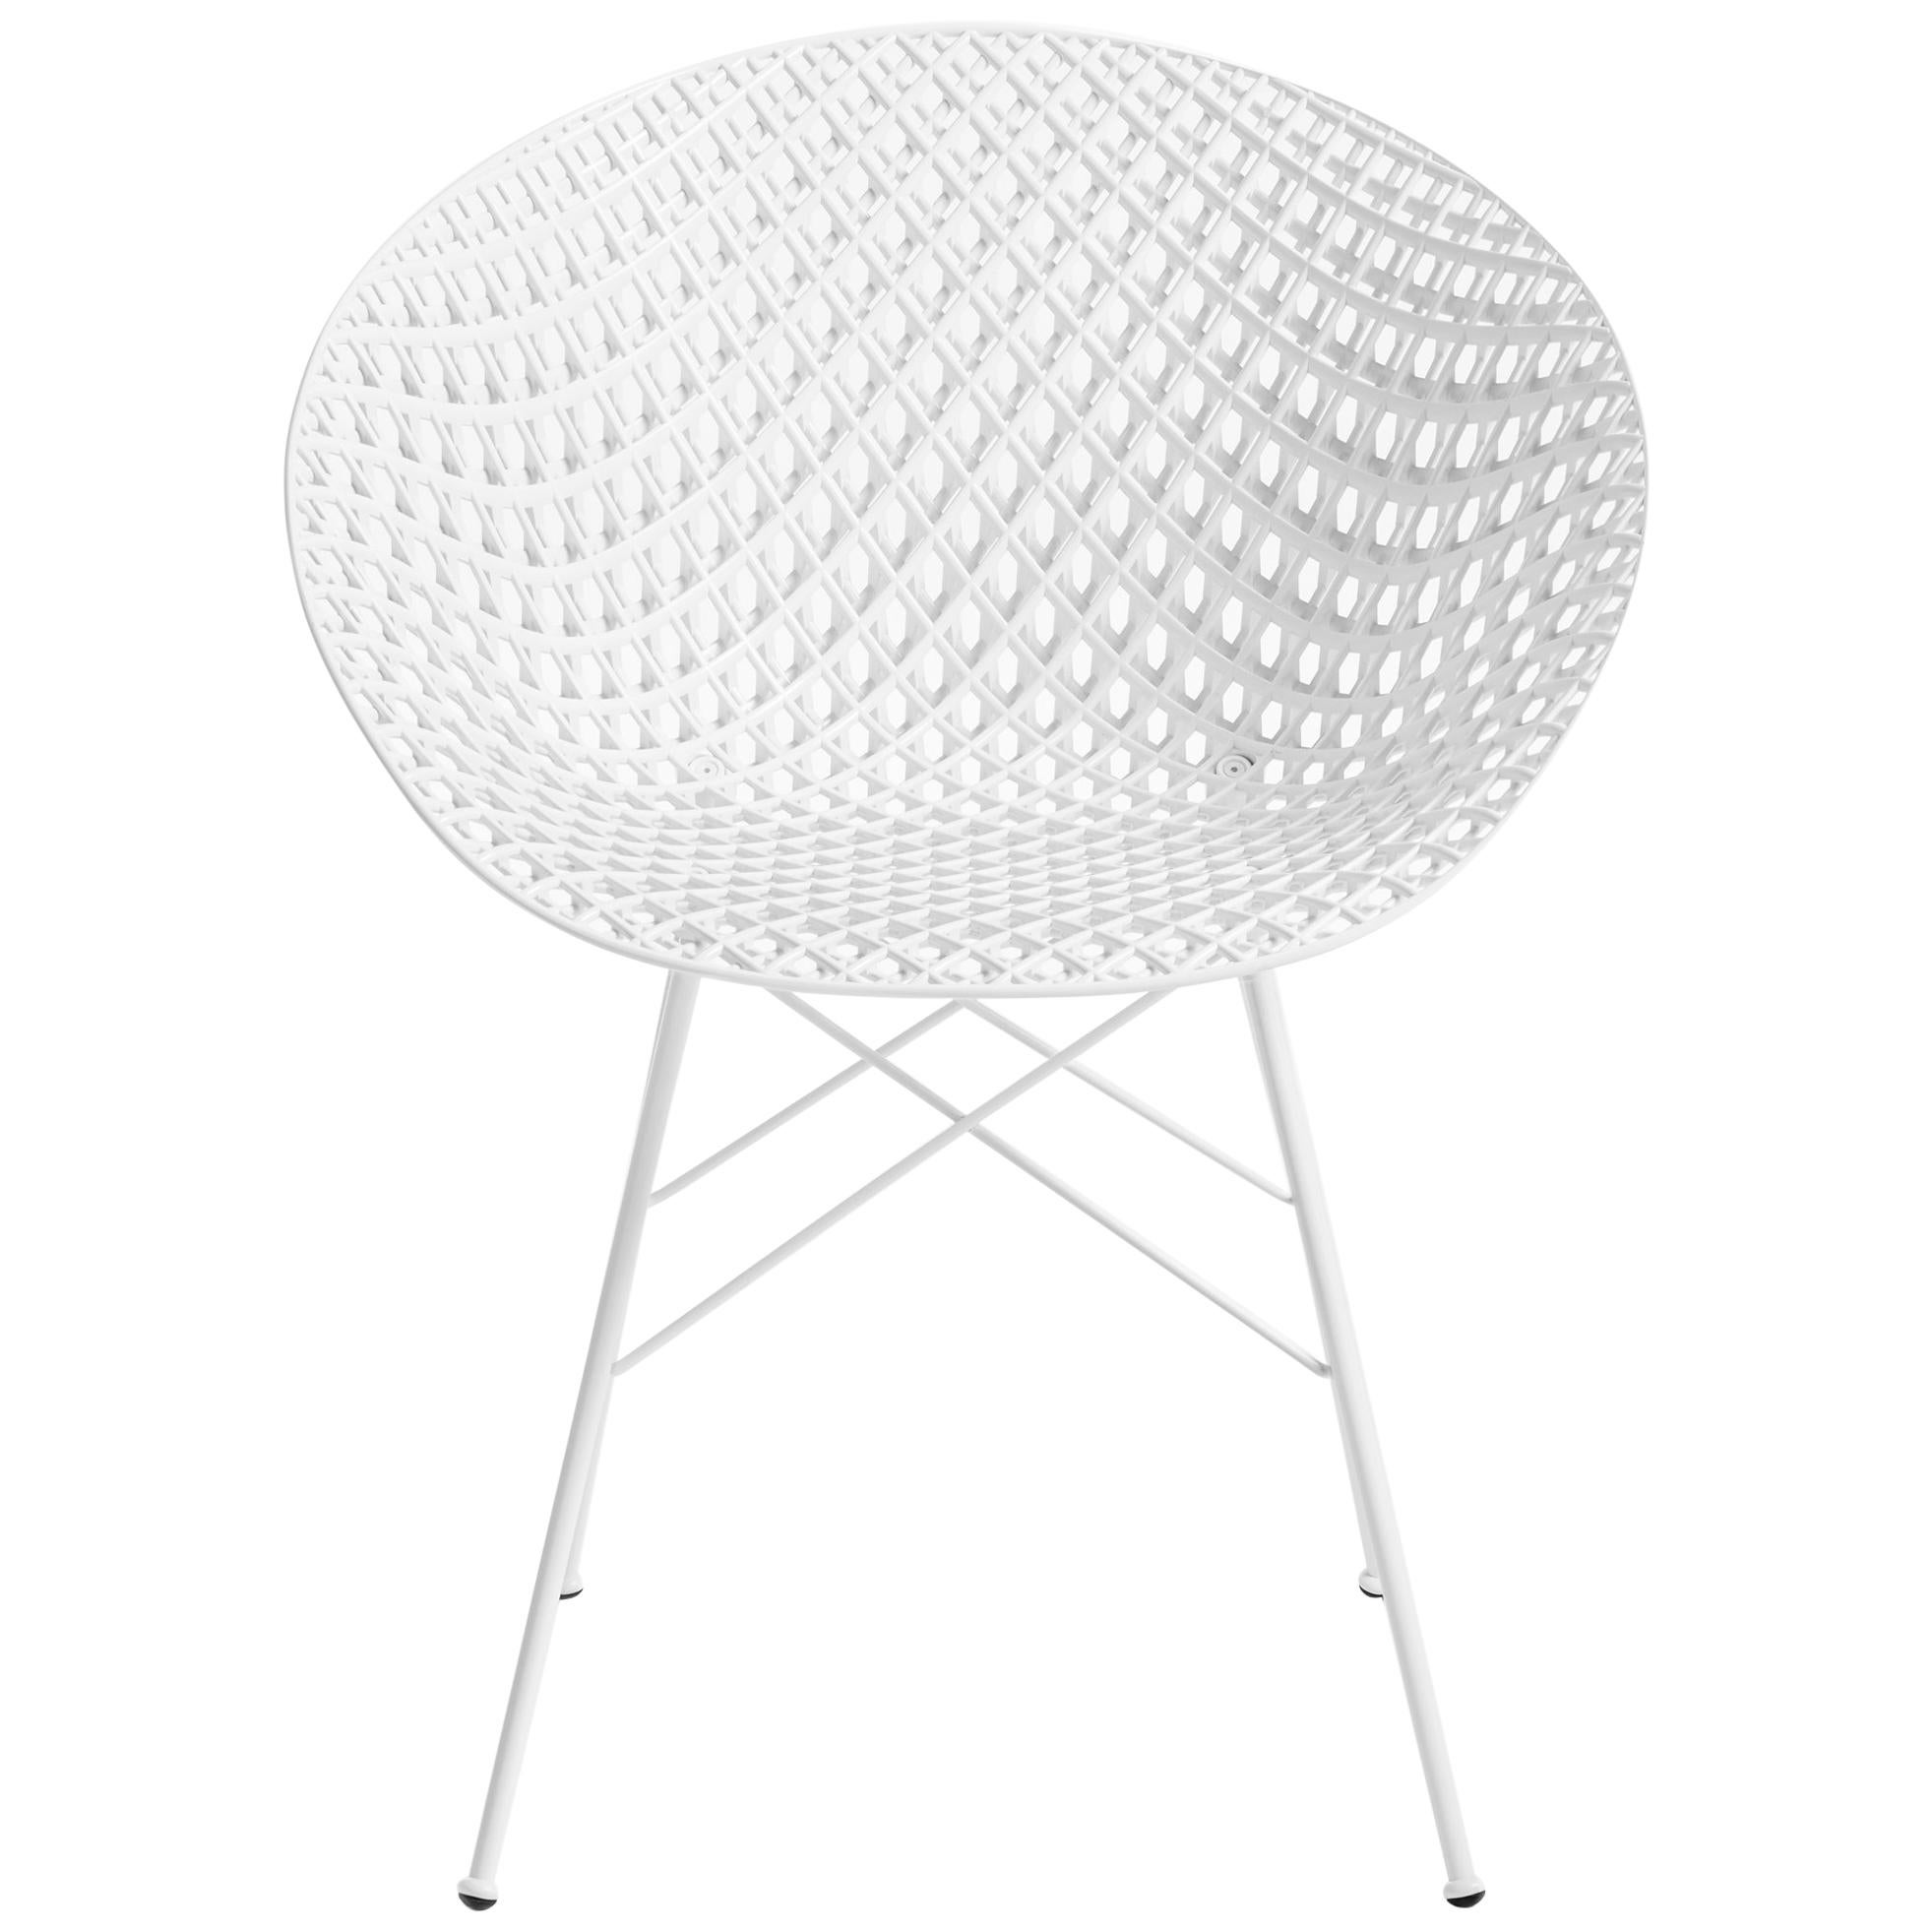 Set of 2 Kartell Smatrik Outdoor Chair in White by Tokujin Yoshioka For Sale